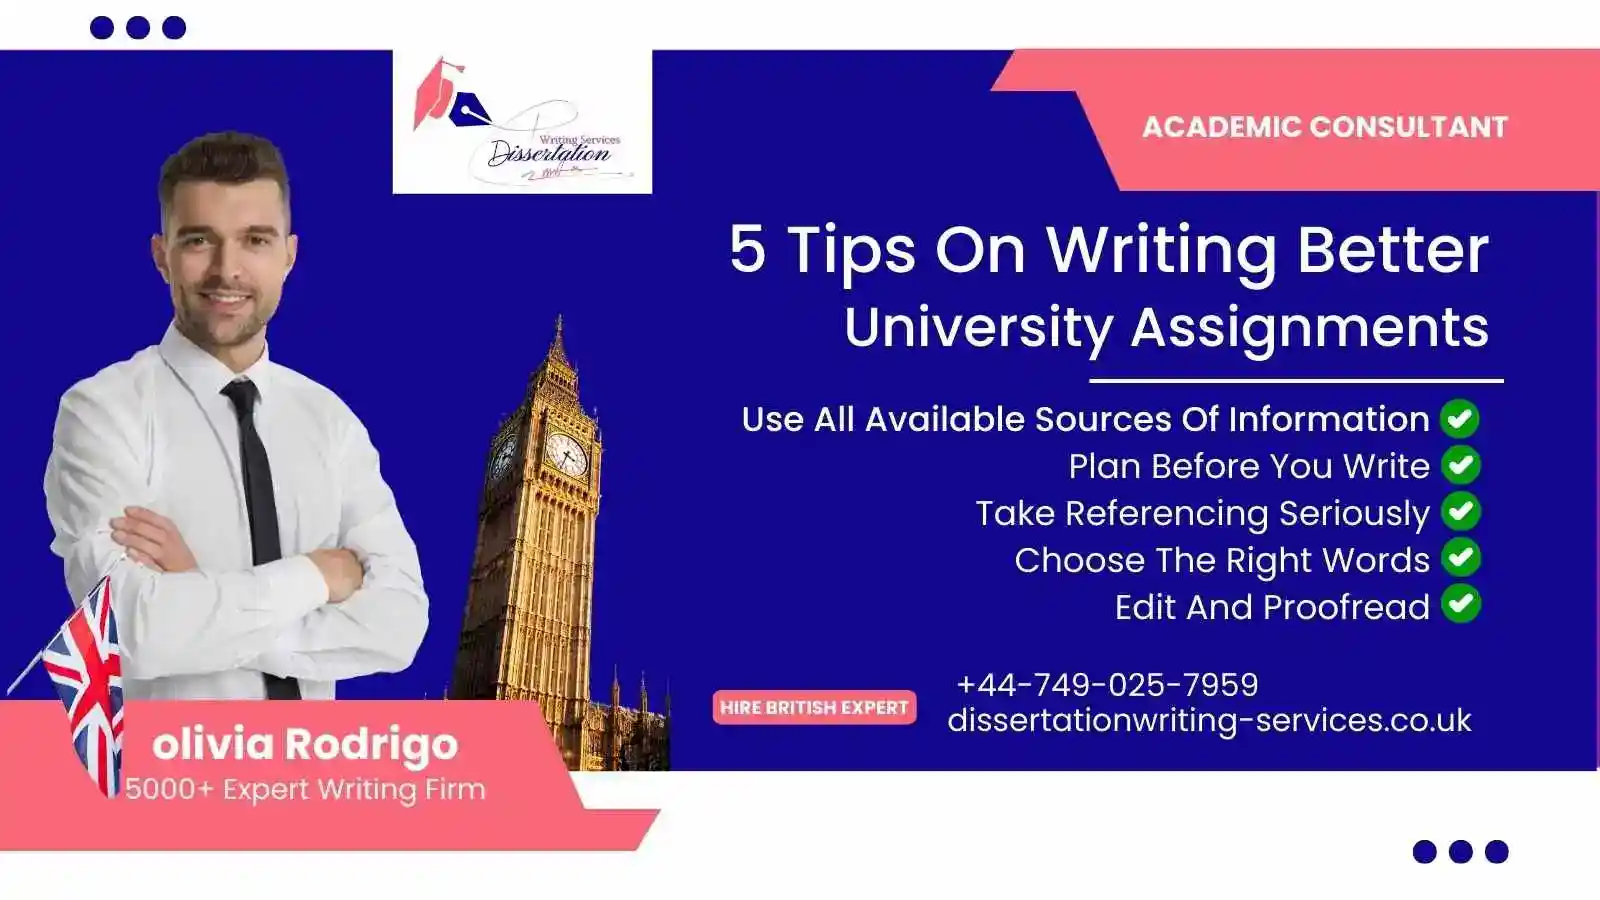 5 tips on writing better university assignments.